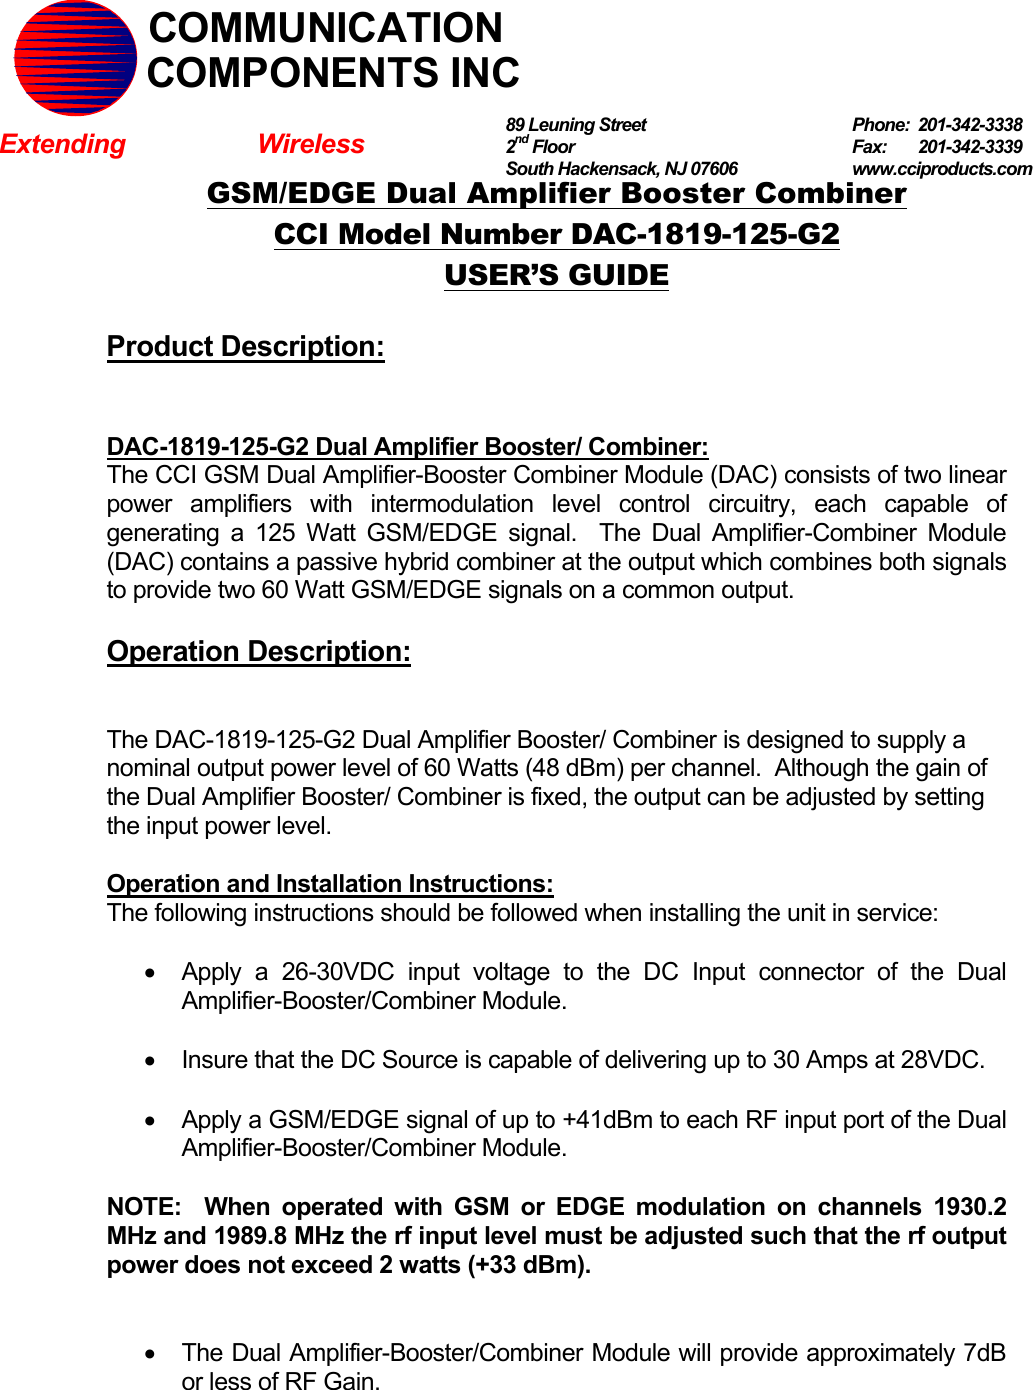   GSM/EDGE Dual Amplifier Booster Combiner CCI Model Number DAC-1819-125-G2 USER’S GUIDE  Product Description:   DAC-1819-125-G2 Dual Amplifier Booster/ Combiner: The CCI GSM Dual Amplifier-Booster Combiner Module (DAC) consists of two linear power amplifiers with intermodulation level control circuitry, each capable of generating a 125 Watt GSM/EDGE signal.  The Dual Amplifier-Combiner Module (DAC) contains a passive hybrid combiner at the output which combines both signals to provide two 60 Watt GSM/EDGE signals on a common output.  Operation Description:   The DAC-1819-125-G2 Dual Amplifier Booster/ Combiner is designed to supply a nominal output power level of 60 Watts (48 dBm) per channel.  Although the gain of the Dual Amplifier Booster/ Combiner is fixed, the output can be adjusted by setting the input power level.    Operation and Installation Instructions: The following instructions should be followed when installing the unit in service:  •  Apply a 26-30VDC input voltage to the DC Input connector of the Dual Amplifier-Booster/Combiner Module.  •  Insure that the DC Source is capable of delivering up to 30 Amps at 28VDC.  •  Apply a GSM/EDGE signal of up to +41dBm to each RF input port of the Dual Amplifier-Booster/Combiner Module.  NOTE:  When operated with GSM or EDGE modulation on channels 1930.2 MHz and 1989.8 MHz the rf input level must be adjusted such that the rf output power does not exceed 2 watts (+33 dBm).   •  The Dual Amplifier-Booster/Combiner Module will provide approximately 7dB or less of RF Gain.  89 Leuning Street   Phone: 201-342-3338 2nd Floor  Fax:   201-342-3339 South Hackensack, NJ 07606   www.cciproducts.com   COMMUNICATIONCOMPONENTS INCExtending Wireless 